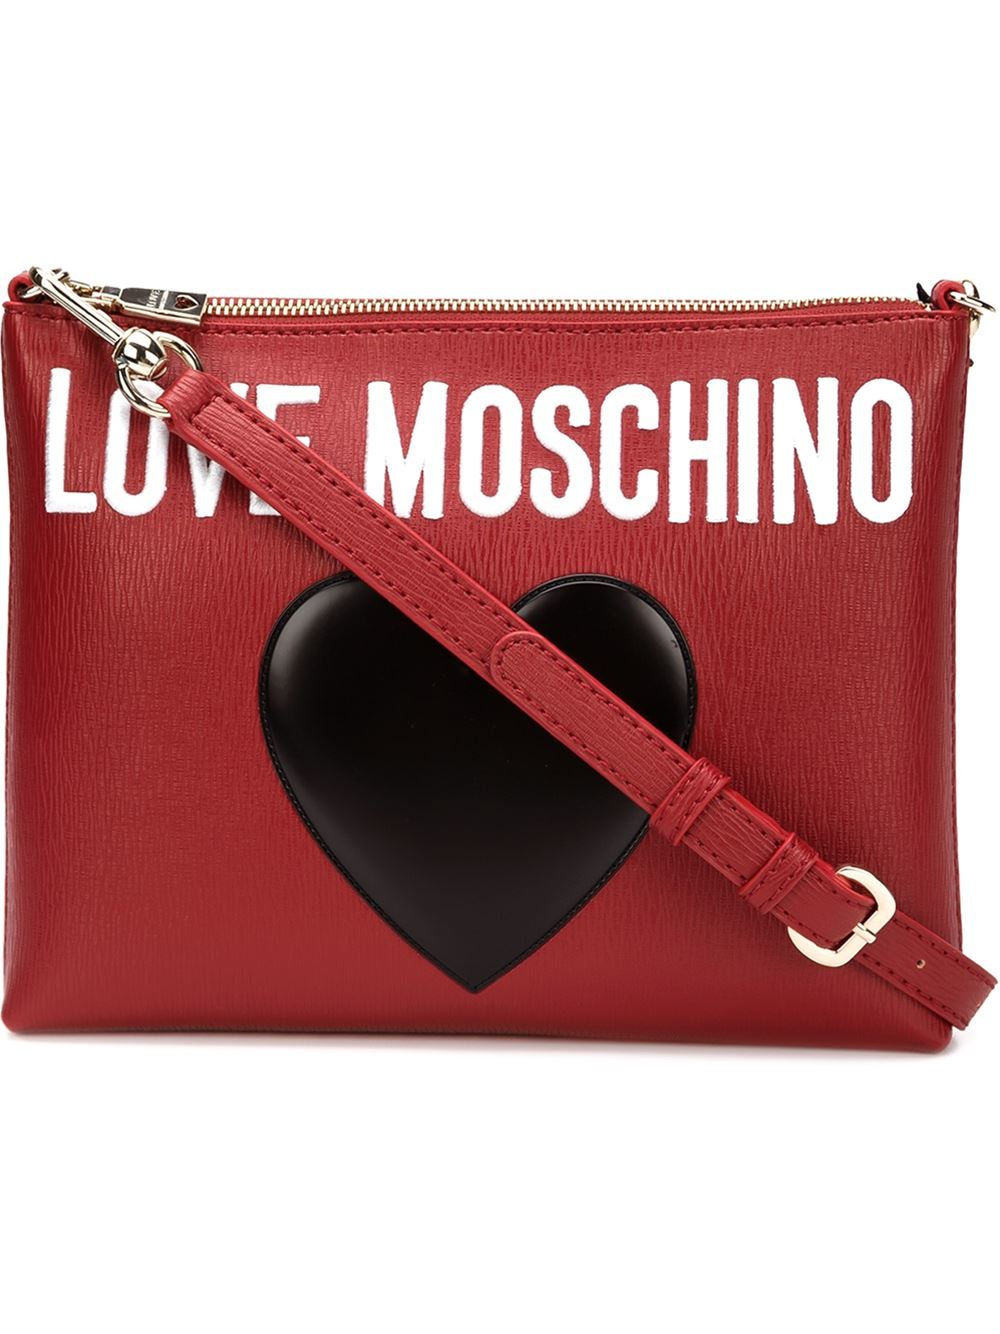 Love Moschino Stitched Heart Crossbody Bag in Red - Lyst